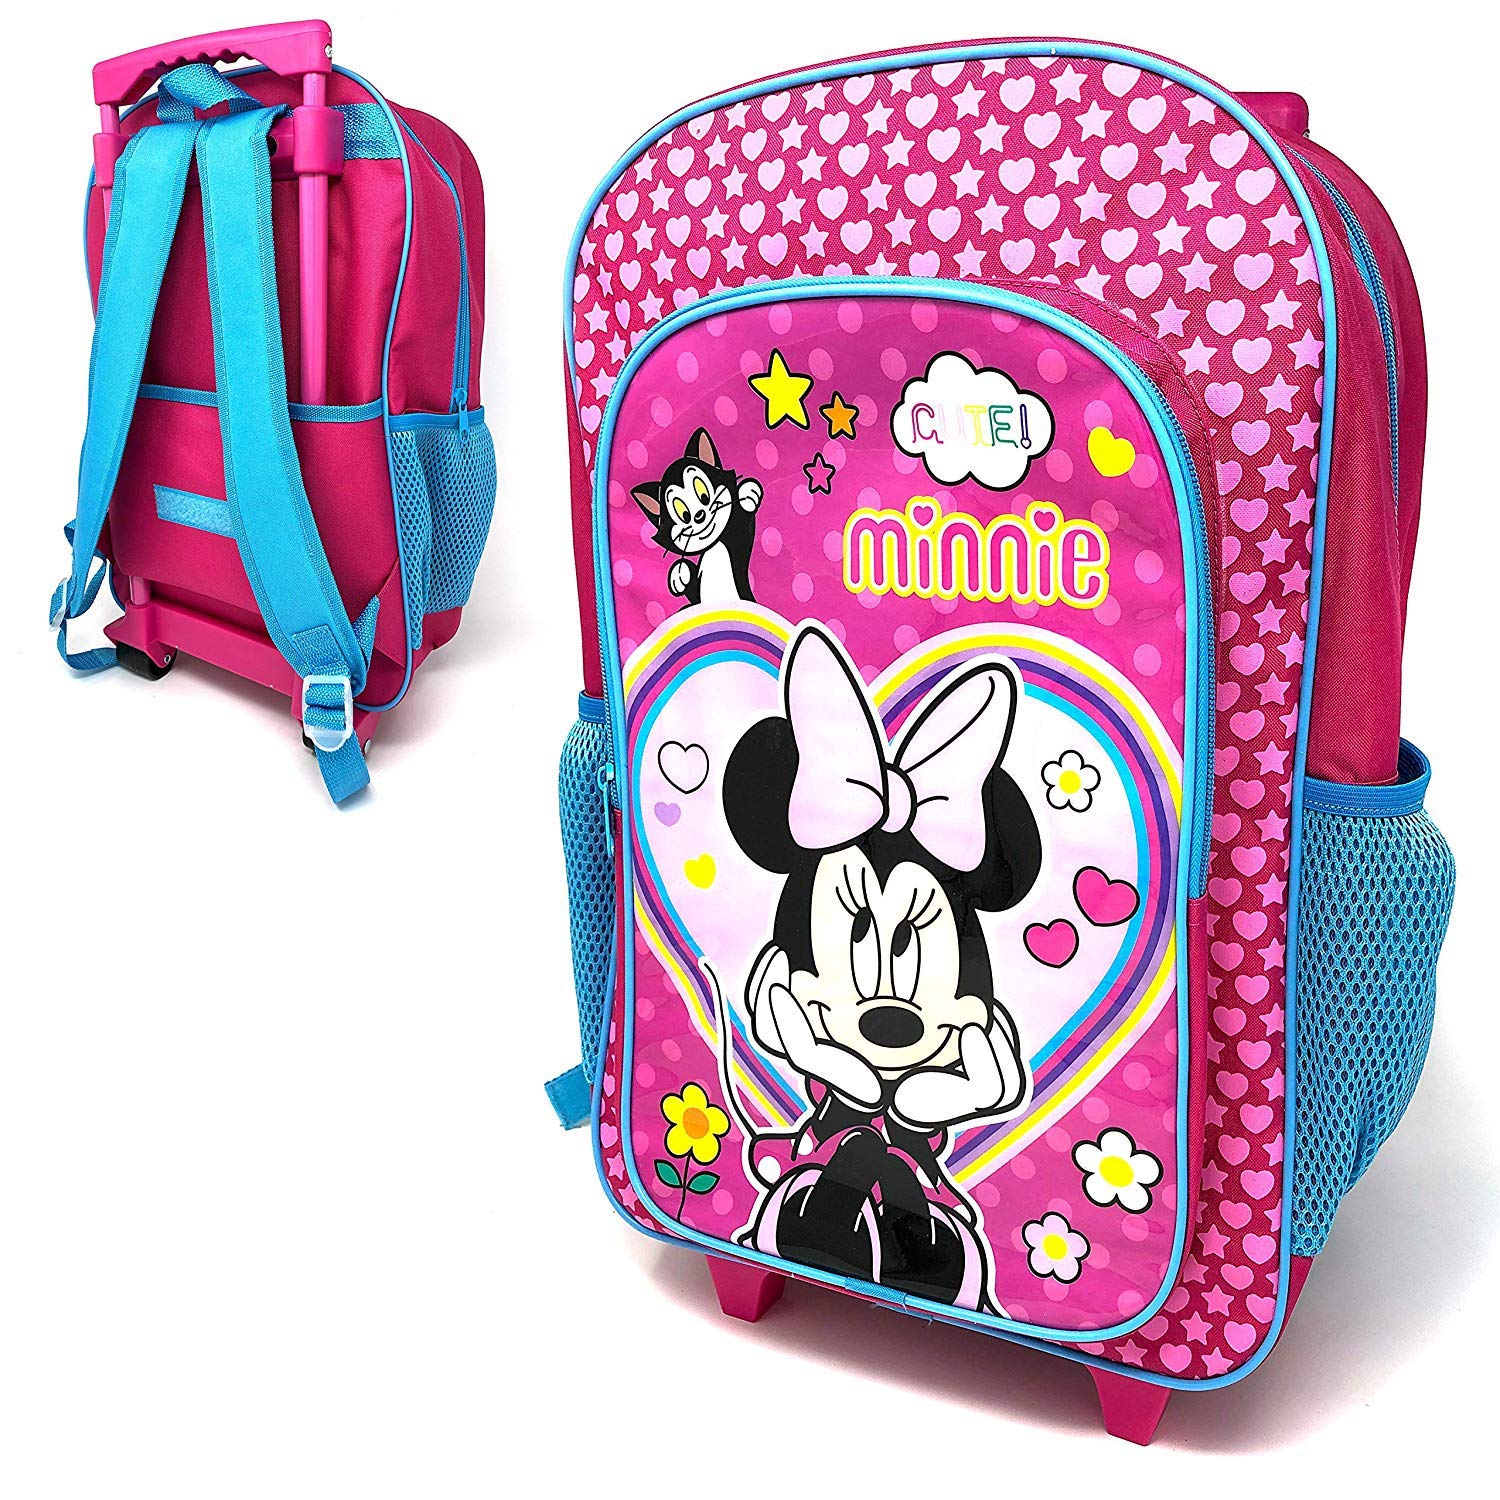 Disney Minnie Mouse Luggage Deluxe School Travel Trolley Roller Wheeled Bag